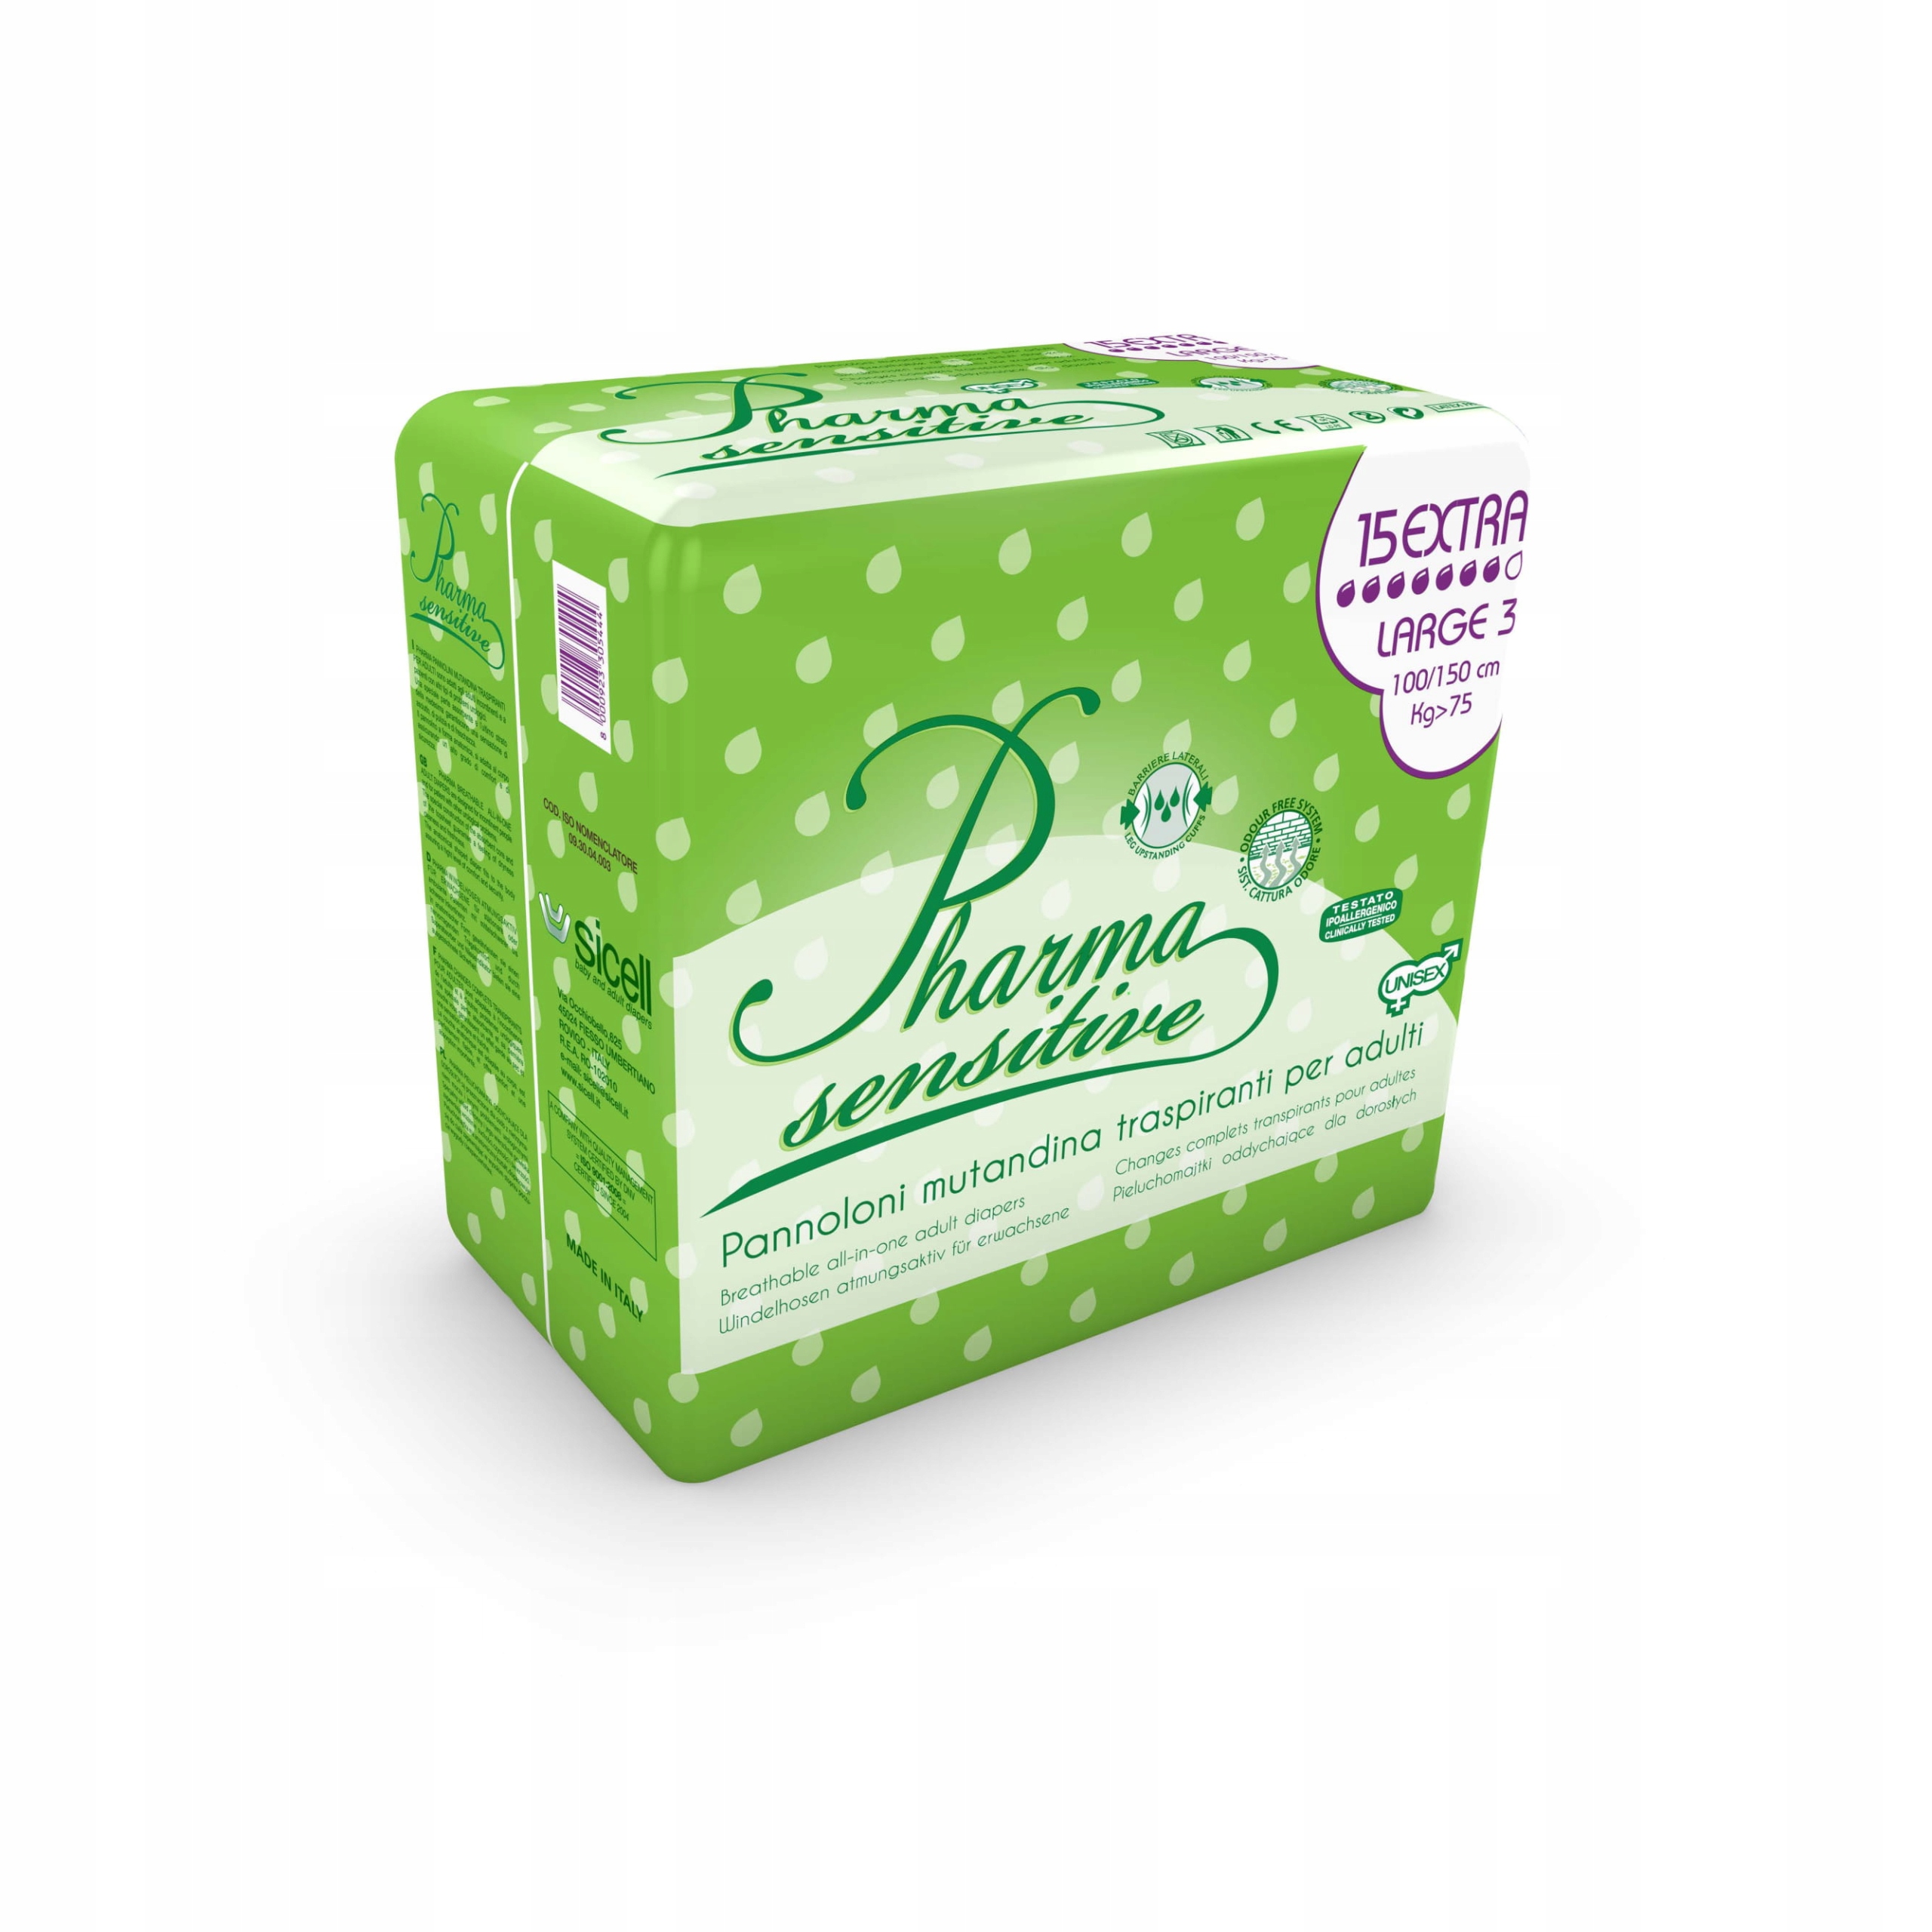 pampers active baby 5 auchan